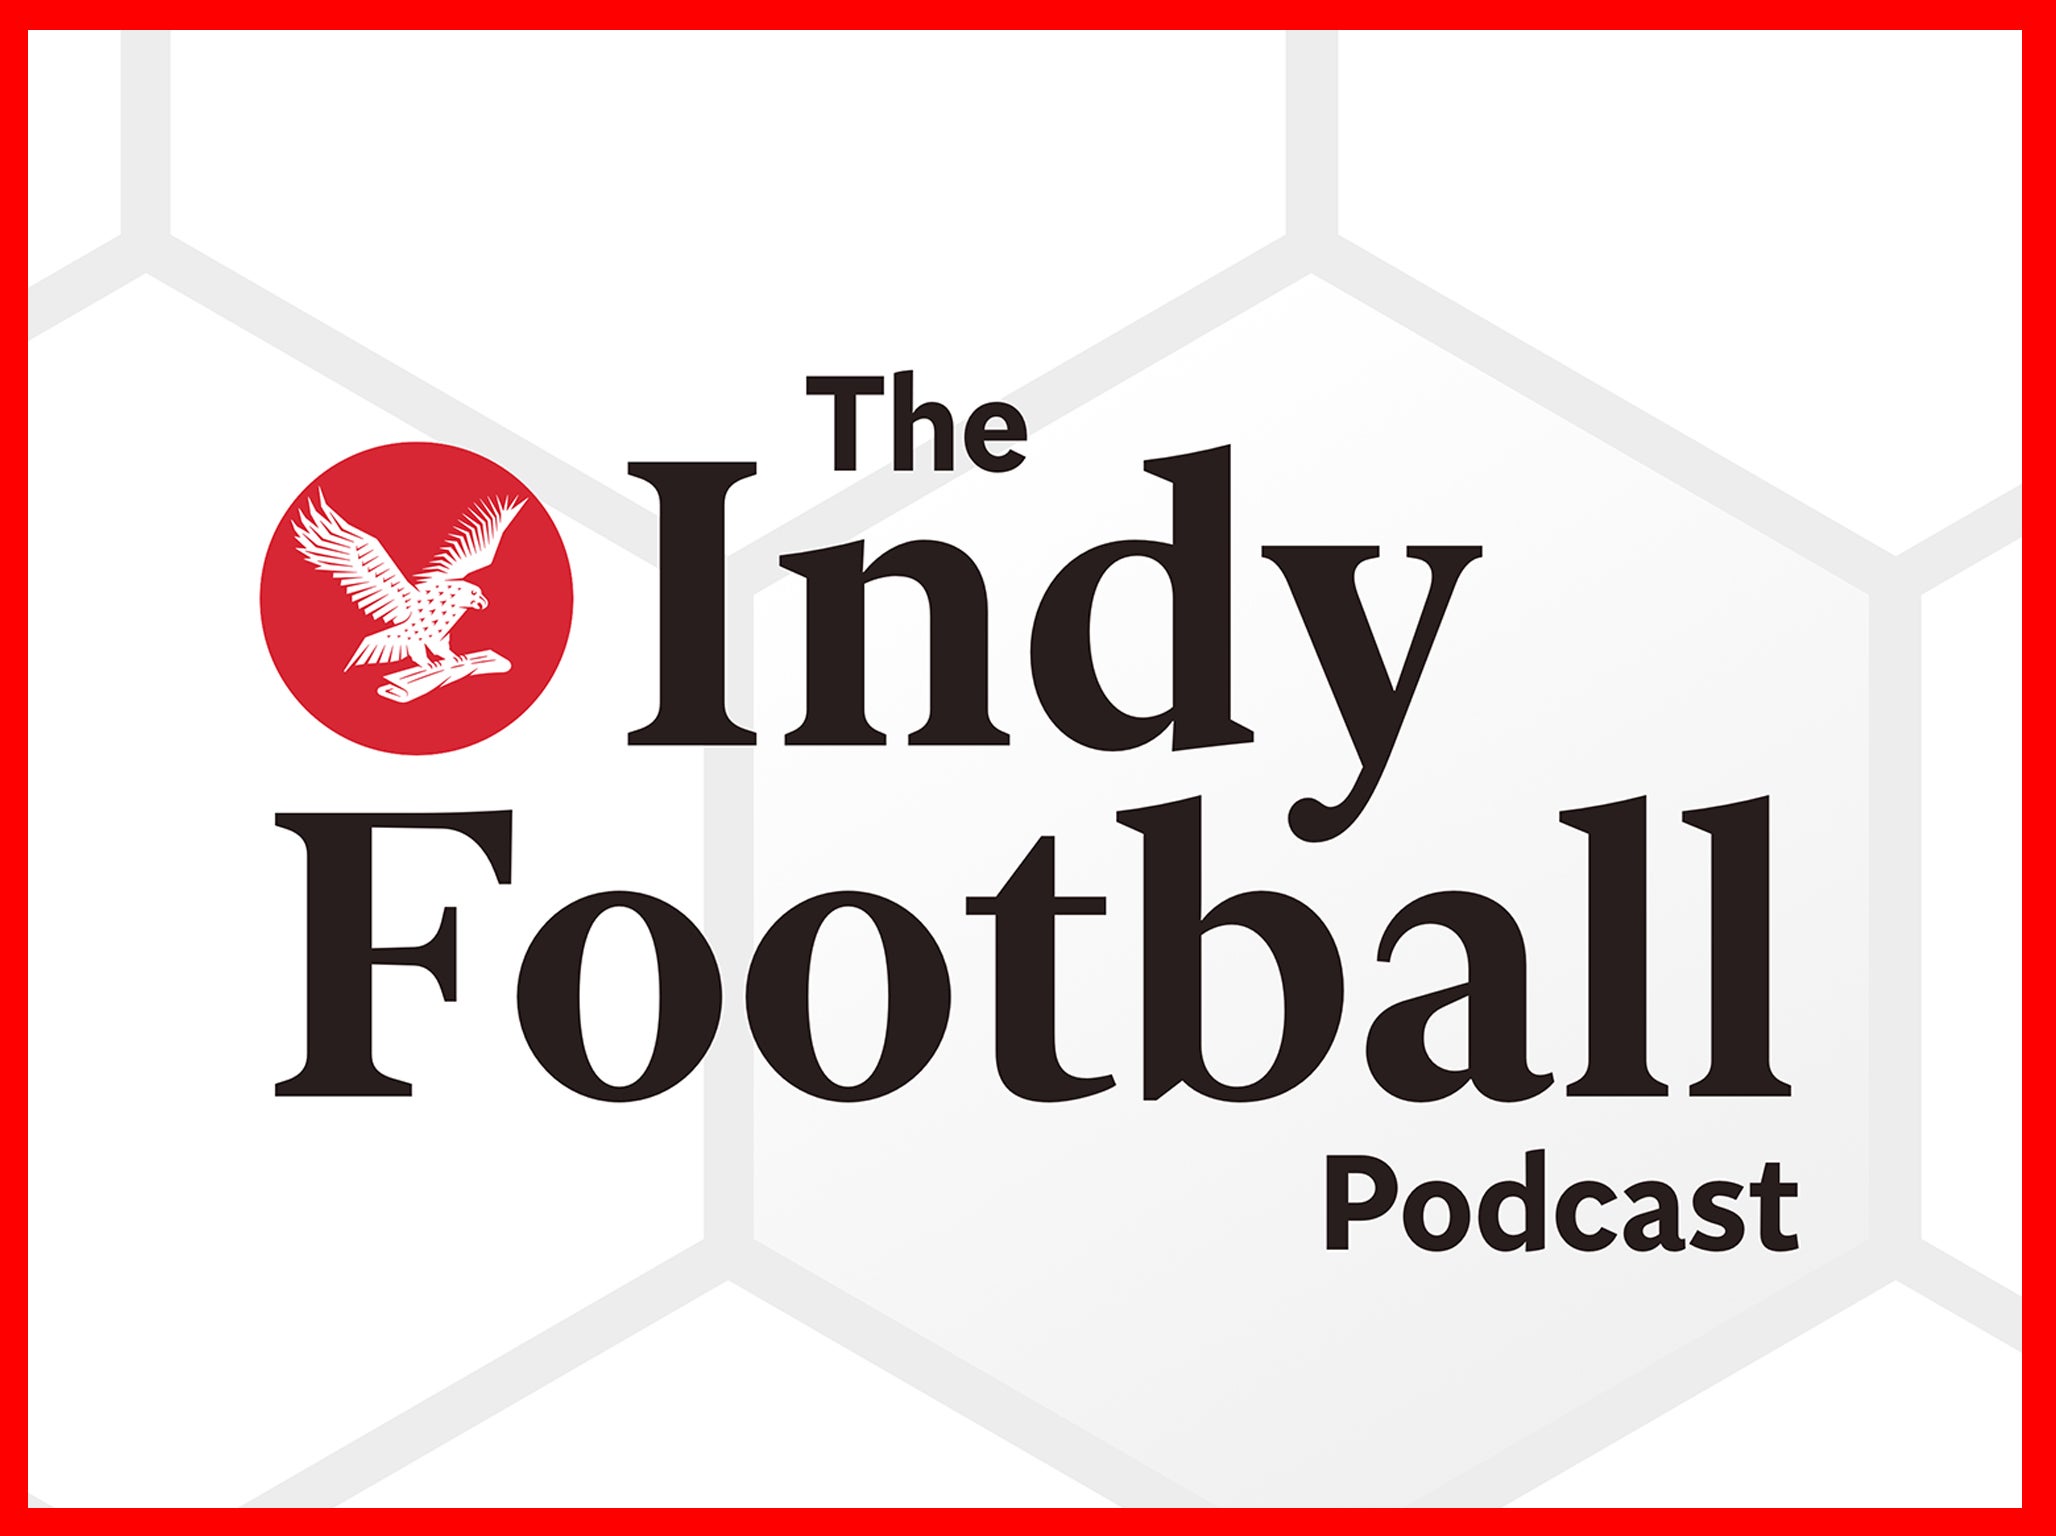 The Indy Football Podcast is back for another season